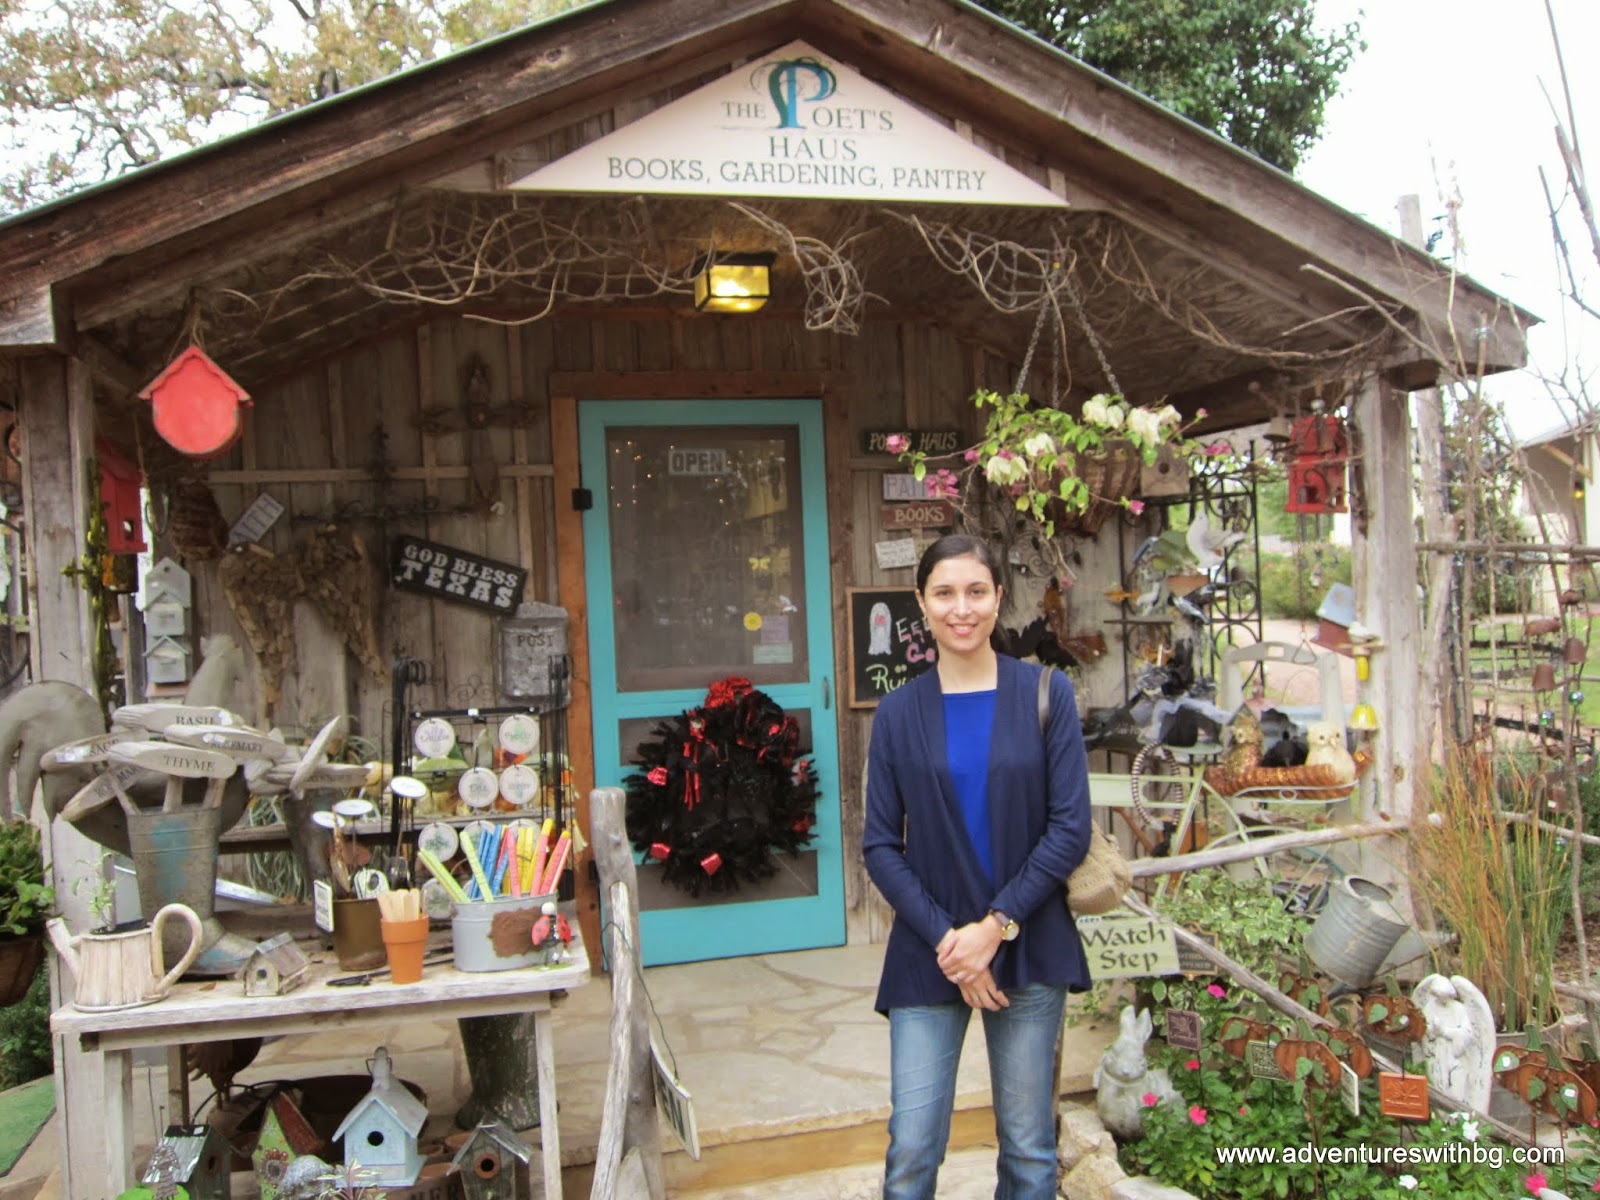 Linda in front of the Farm Haus Bistro gift shop